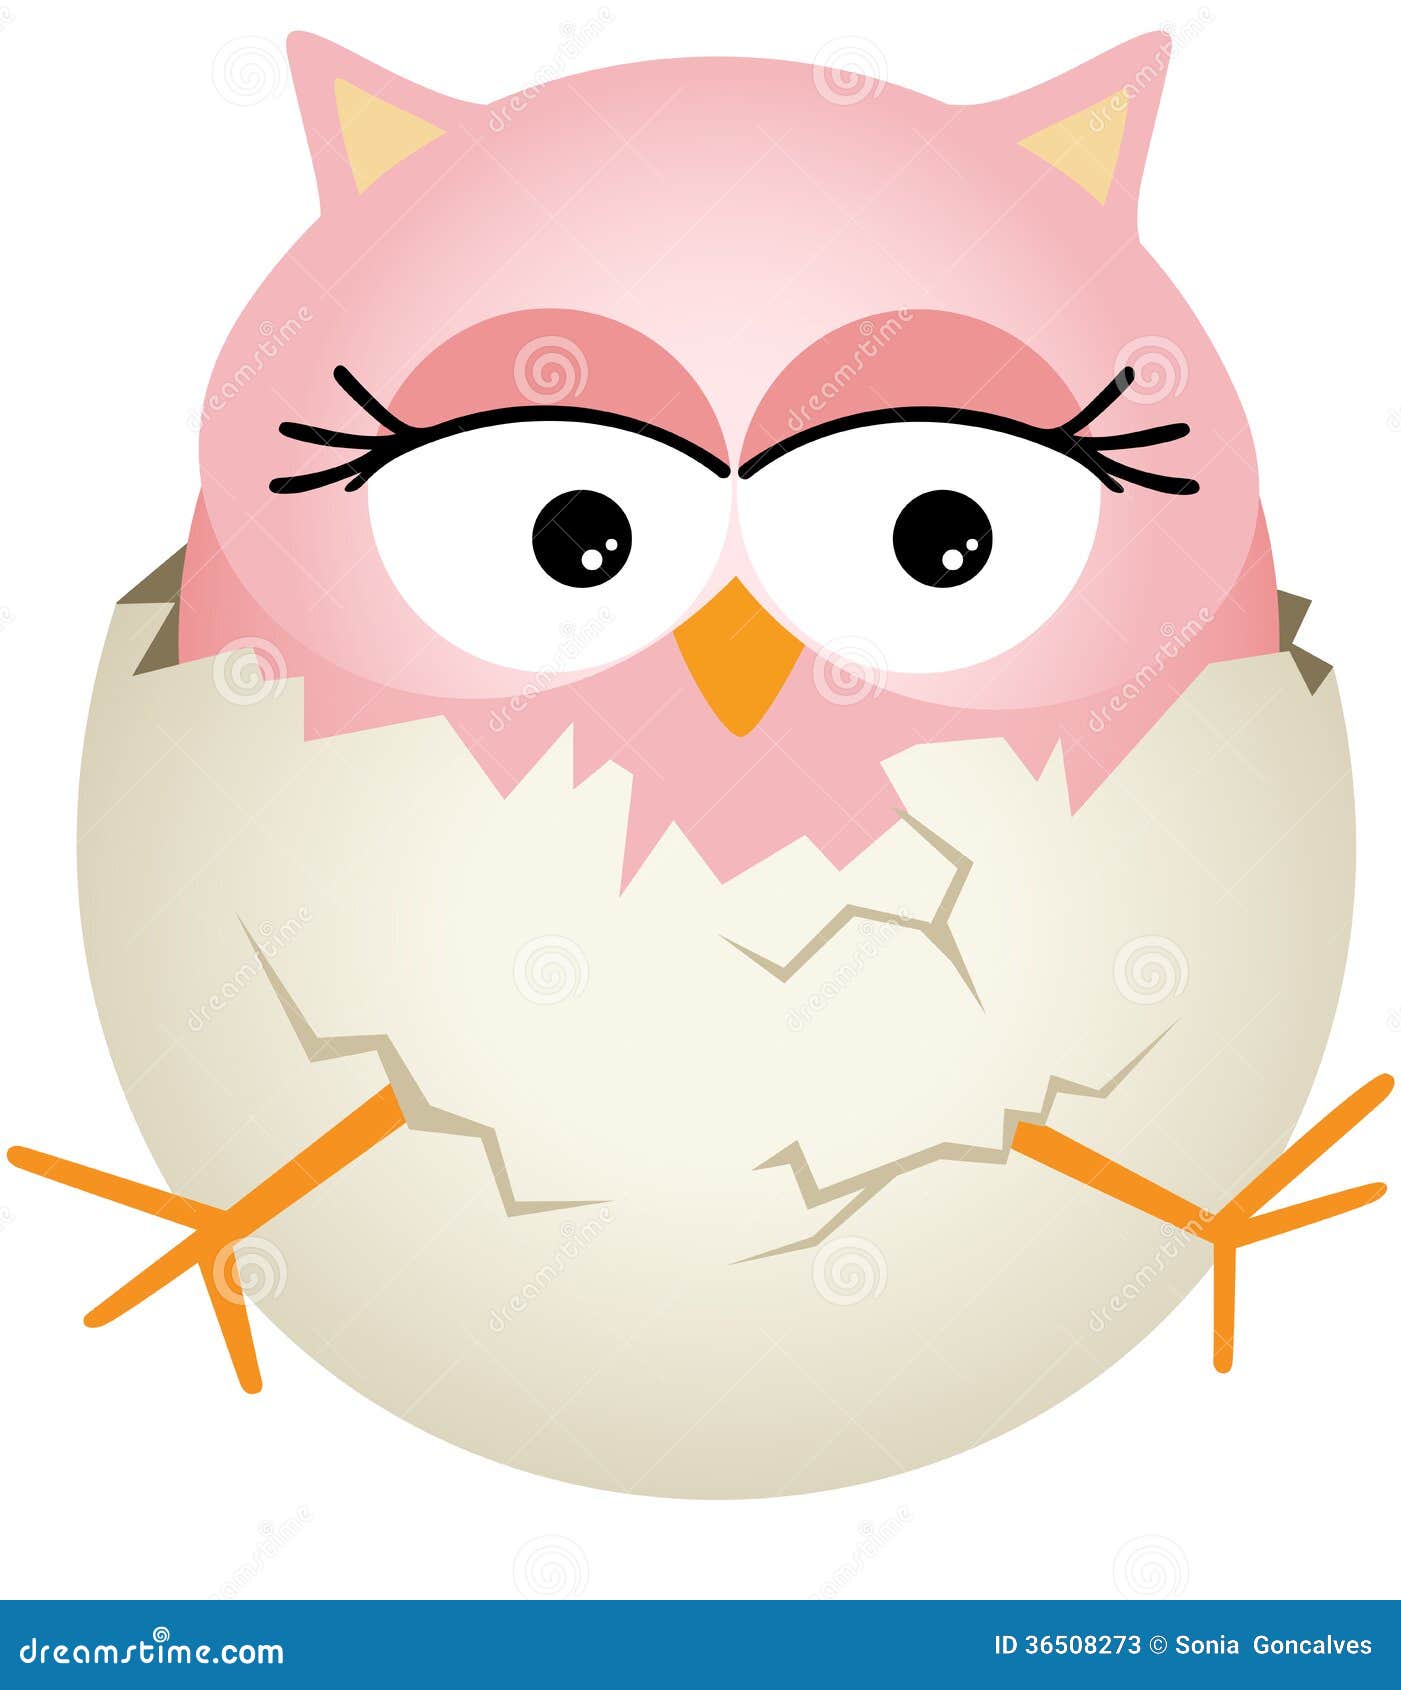 pink-baby-owl-egg-scalable-vectorial-image-representing-isolated-white-36508273.jpg